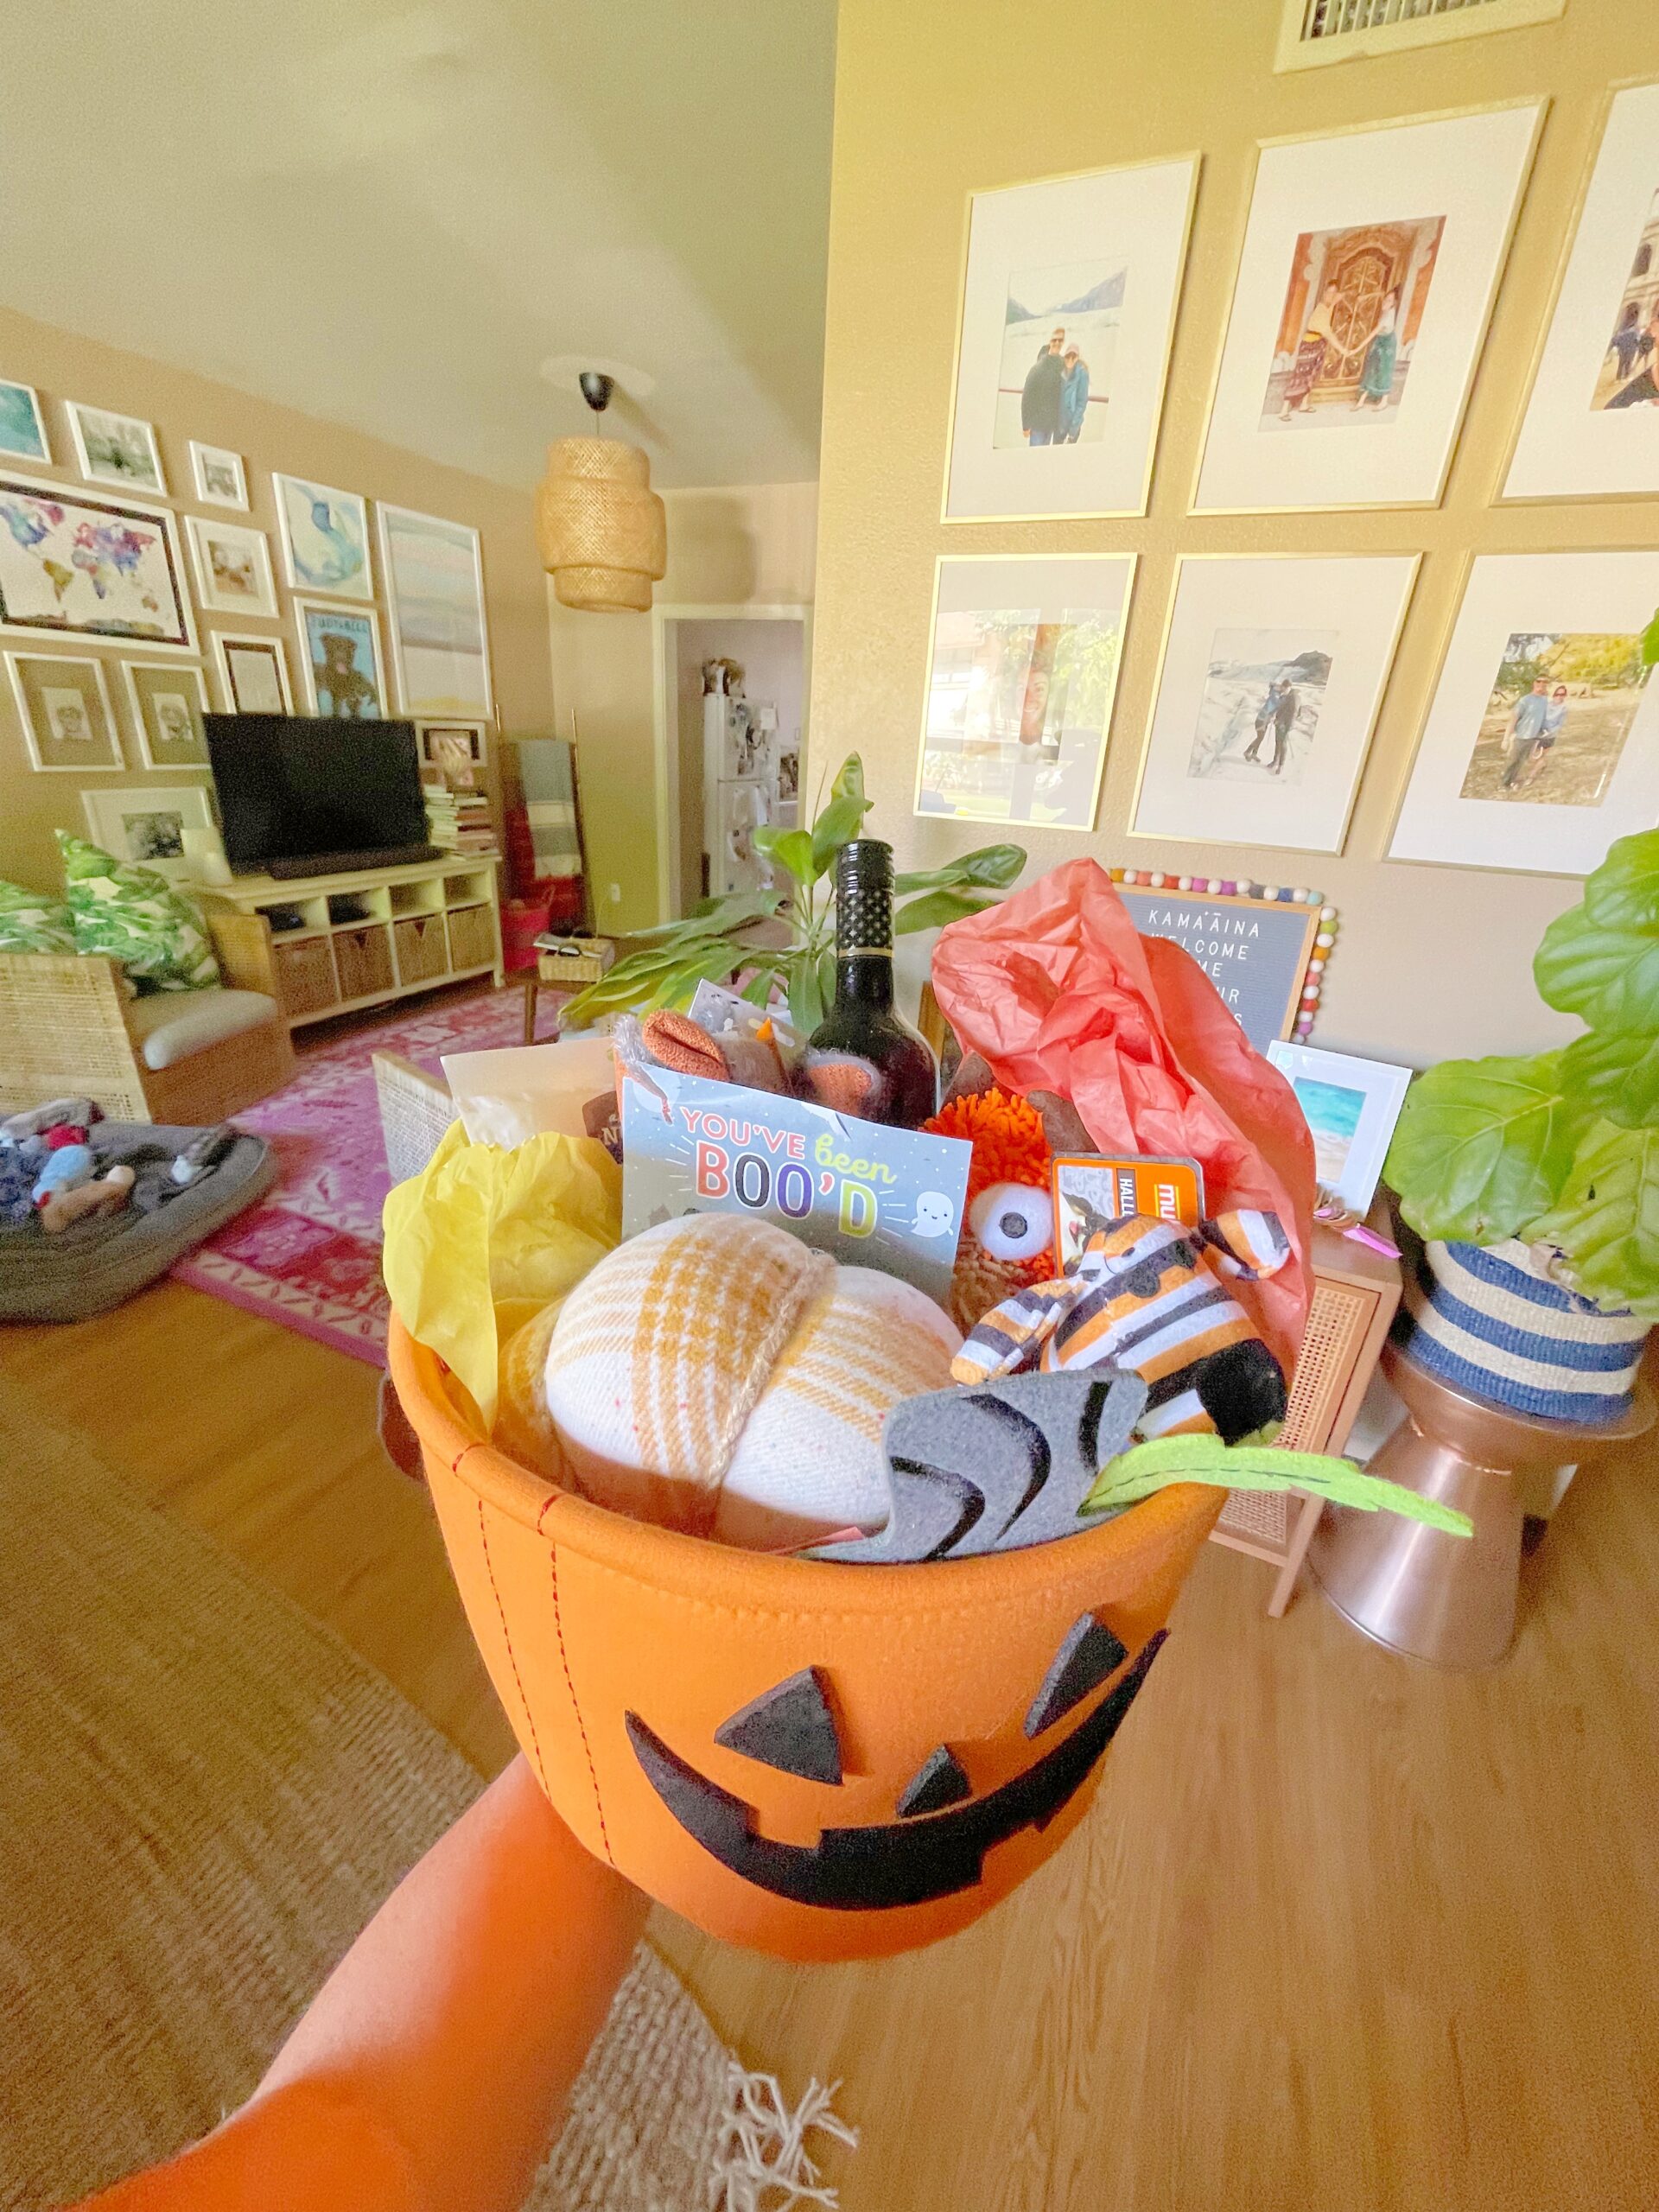 How To Boo Your Neighbor For Halloween - Have you been wanting to BOO your neighbor? I'm sharing more about this fun Halloween idea and what you need to get started! | Halloween ideas | Halloween BOO basket